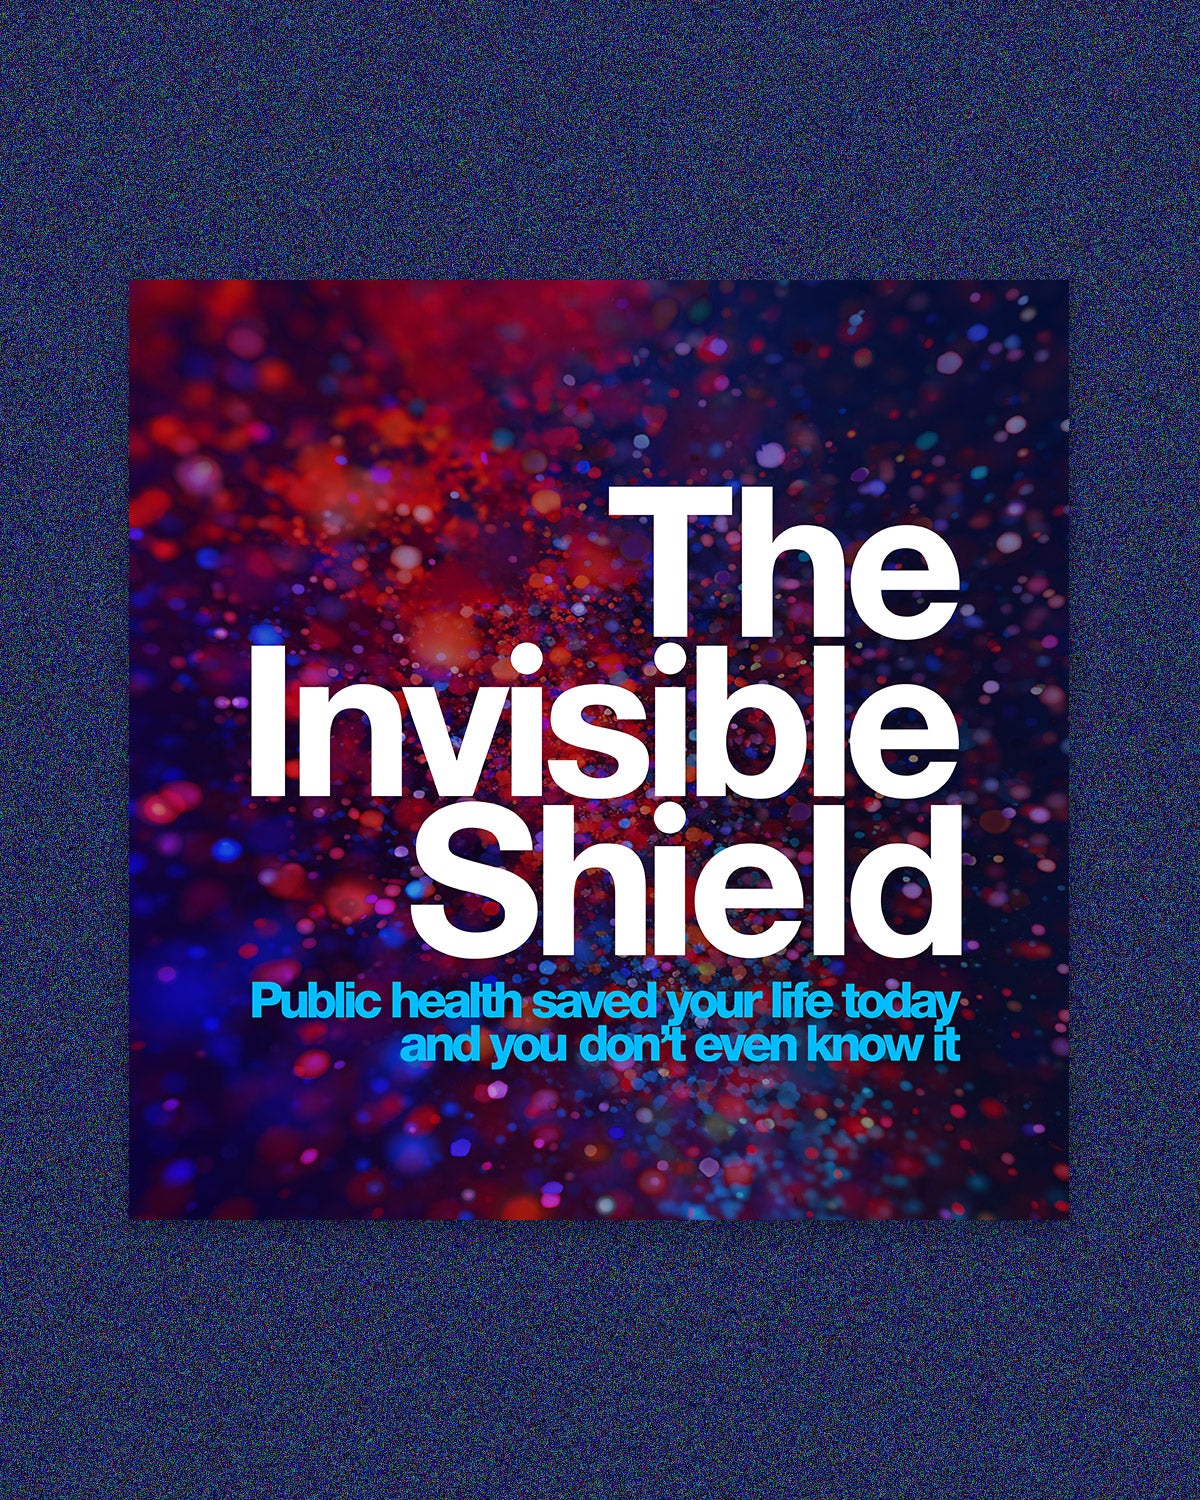 TV tile art for "The Invisible Shield: Public health saved your life and you don't even know it."